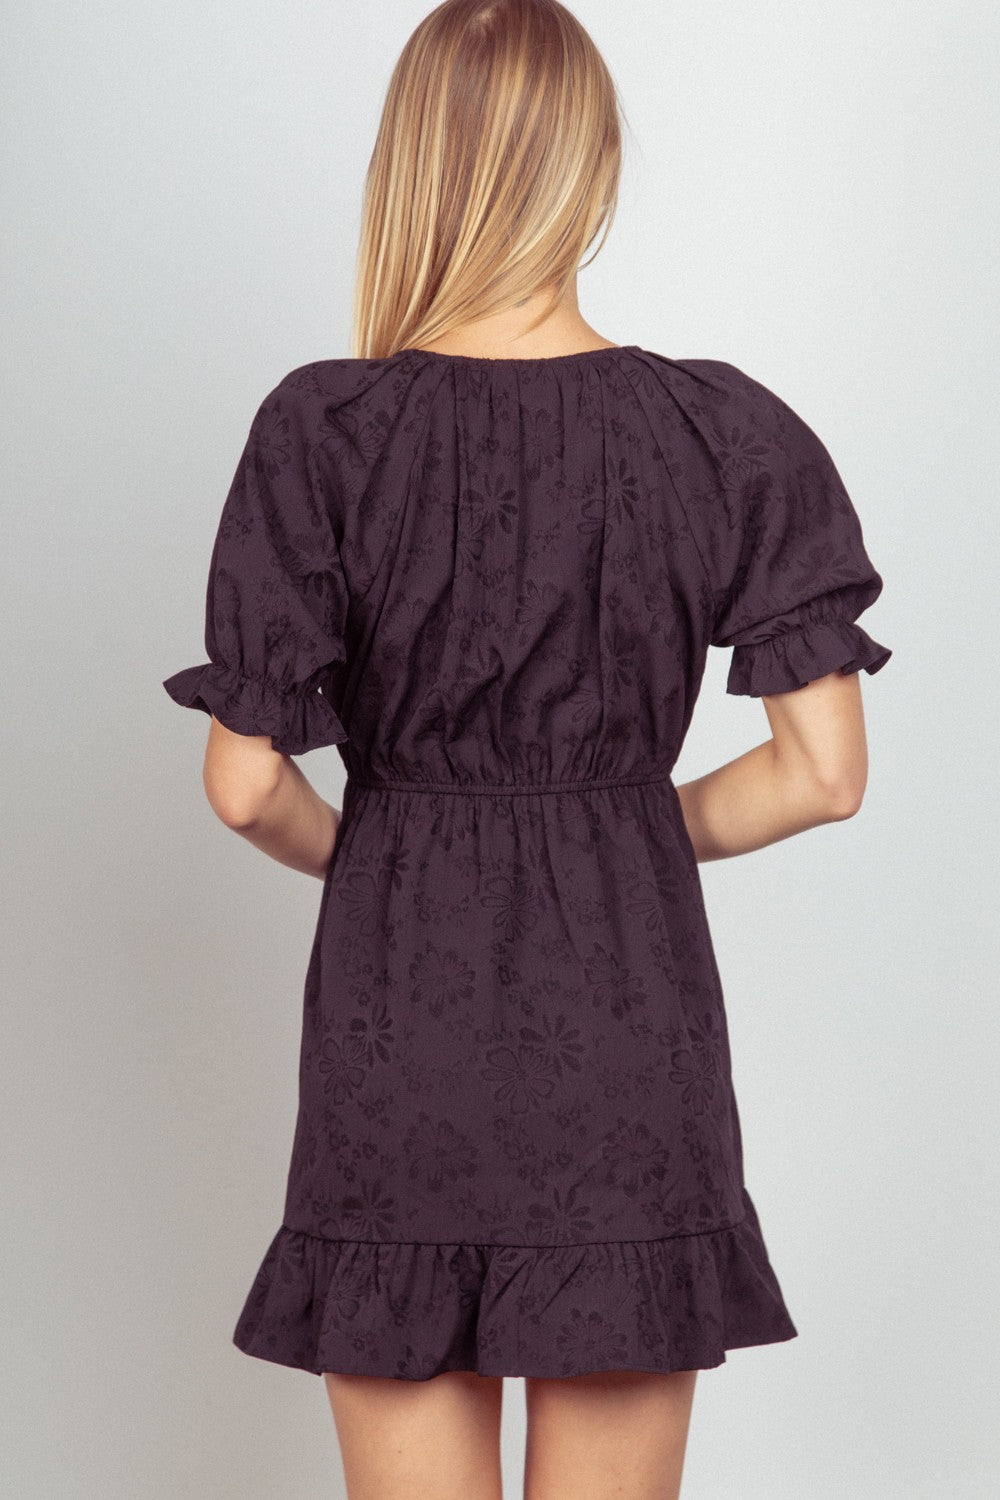 This Floral Textured Woven Ruffled Mini Dress is a charming and feminine choice for any special occasion. The floral textured fabric adds a romantic touch to the sweet ruffled details.  S - L